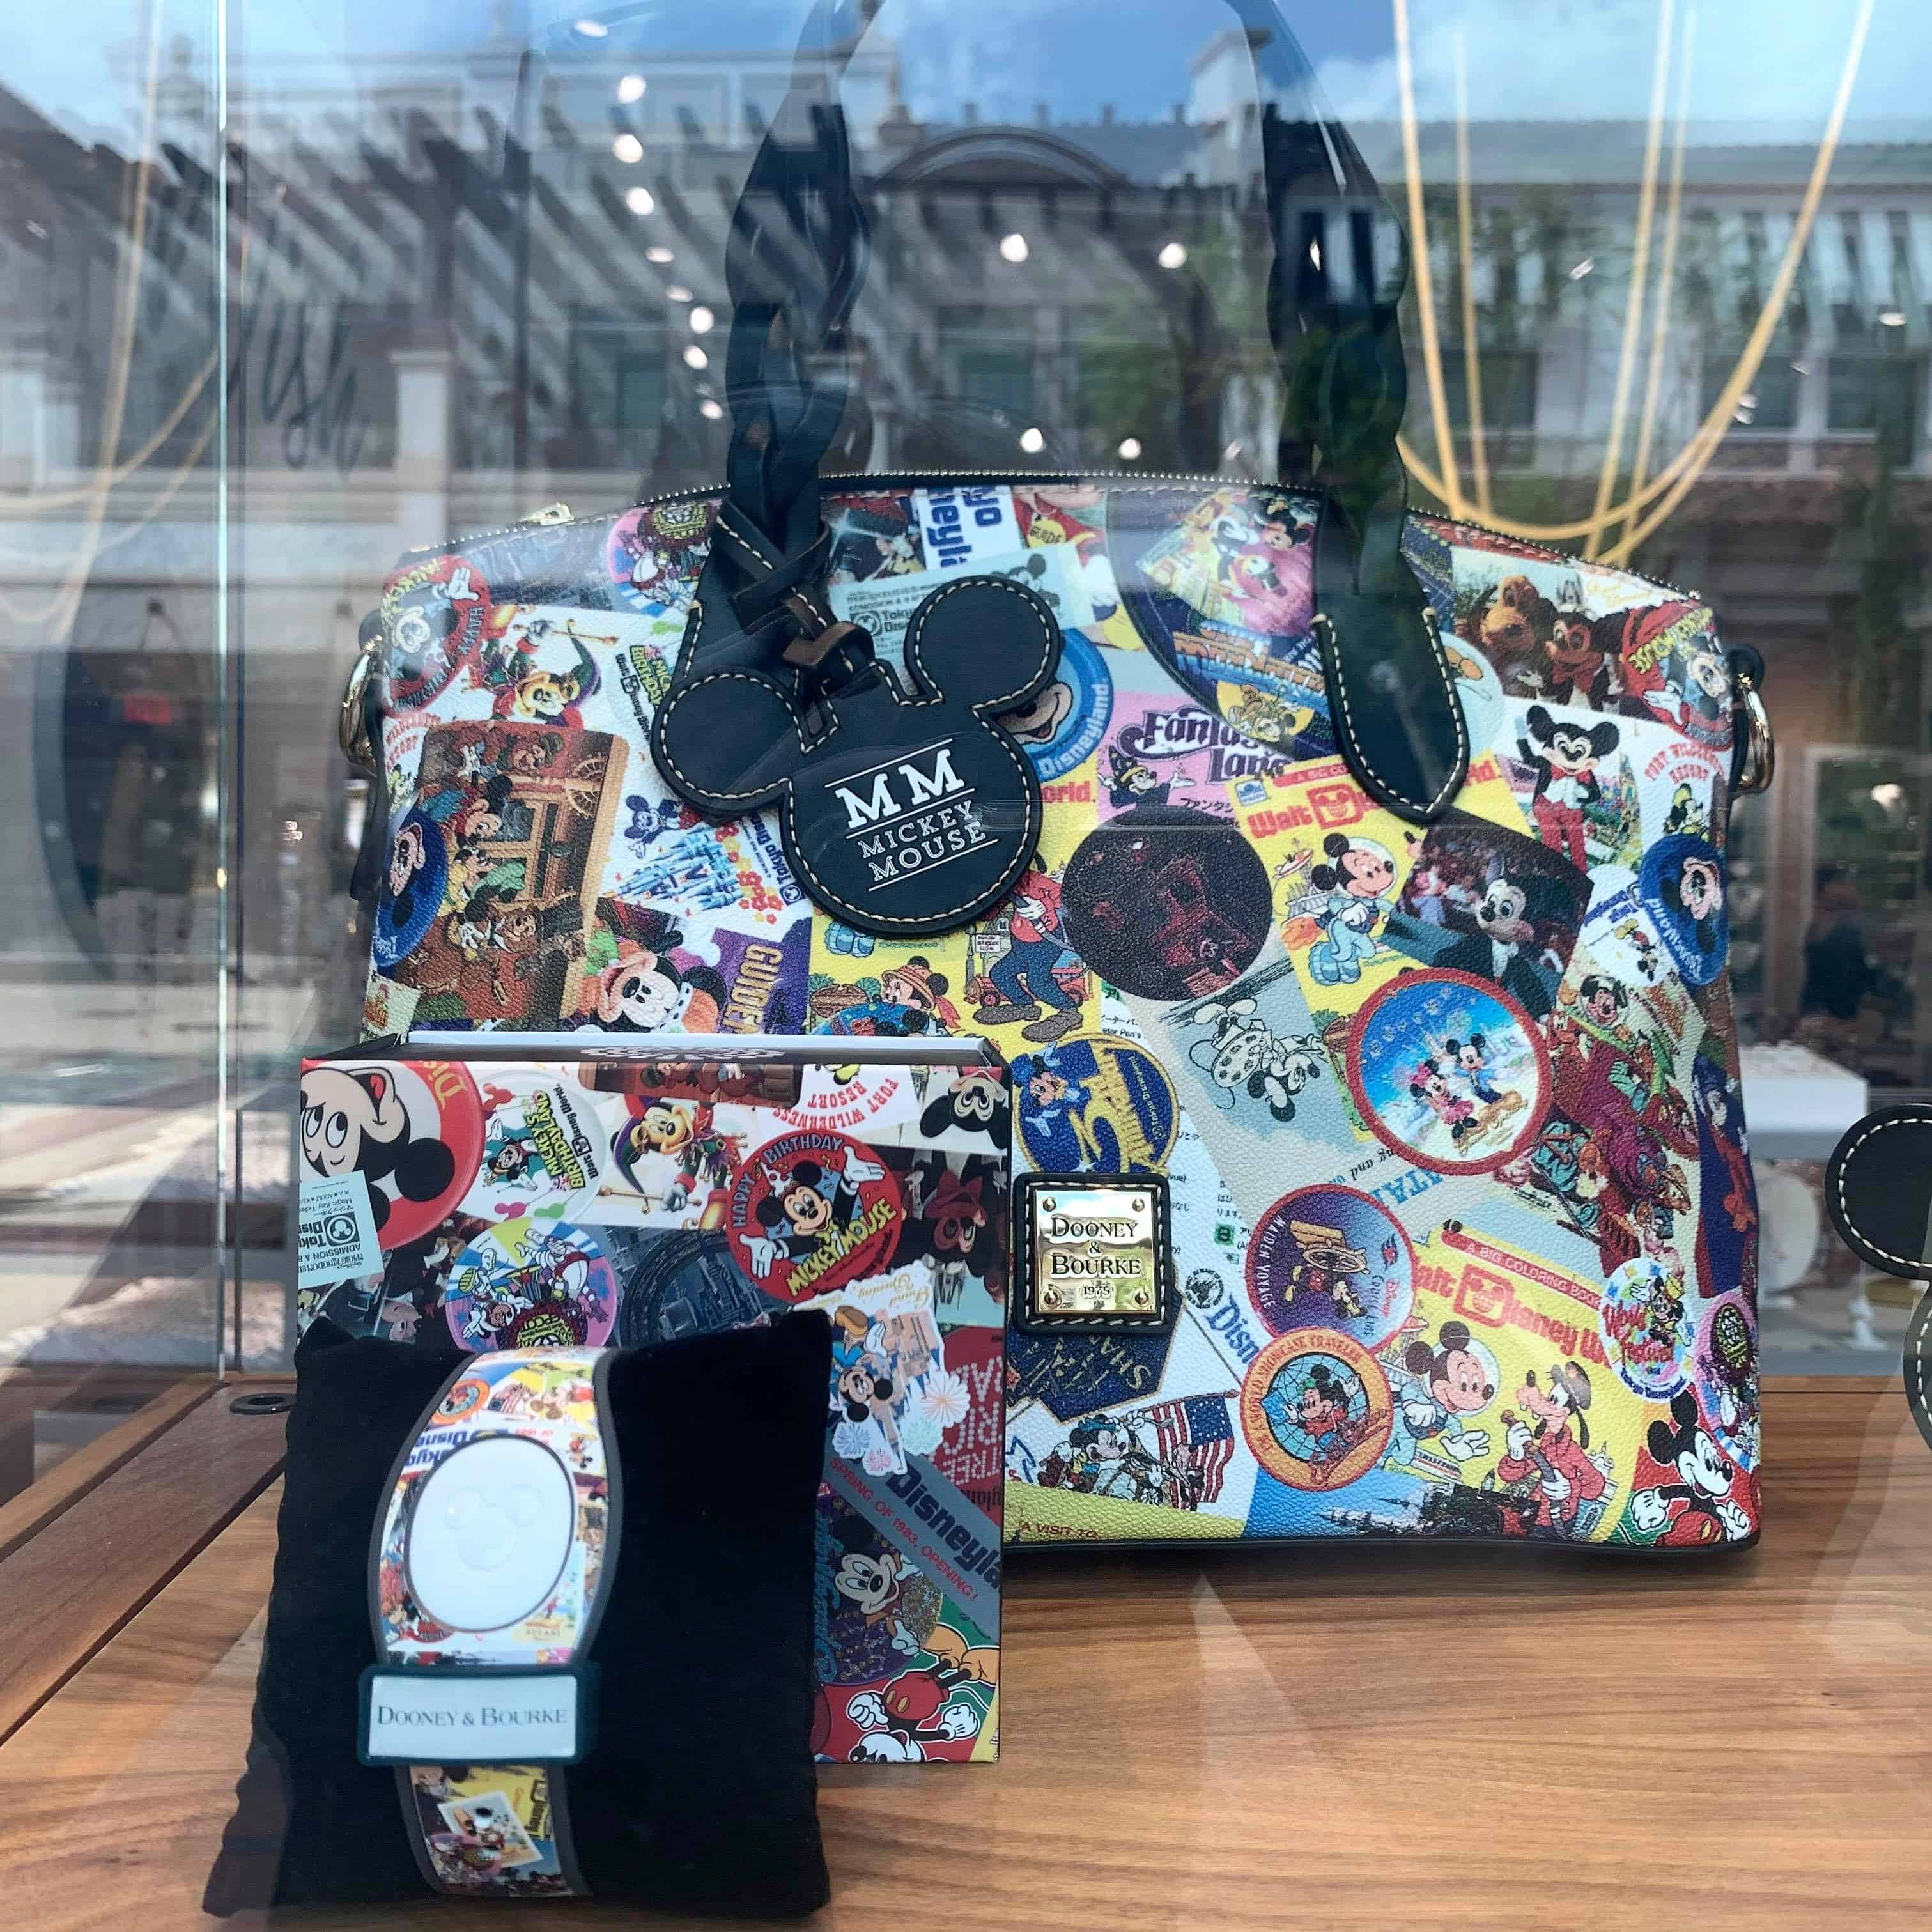 New Dooney & Bourke Bags Inspired by First Mickey Mouse Cartoon (and  Featuring an Incorrect Walt Disney Quote) Coming Soon - Disneyland News  Today